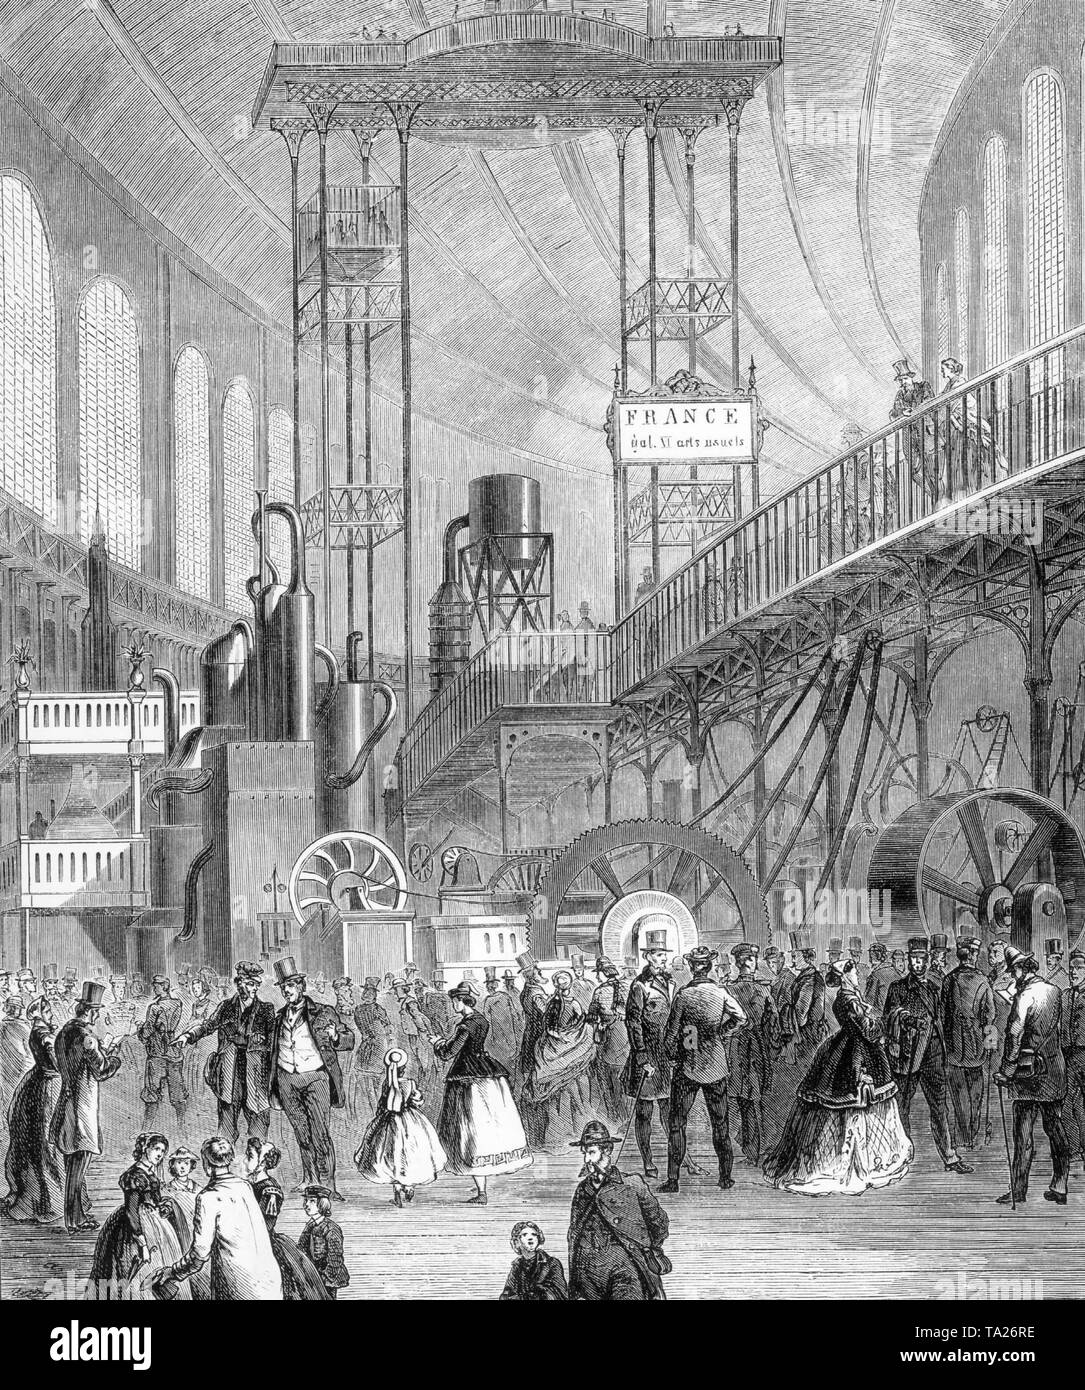 The elevator in the engine room at the Paris International Exposition 1867. Stock Photo